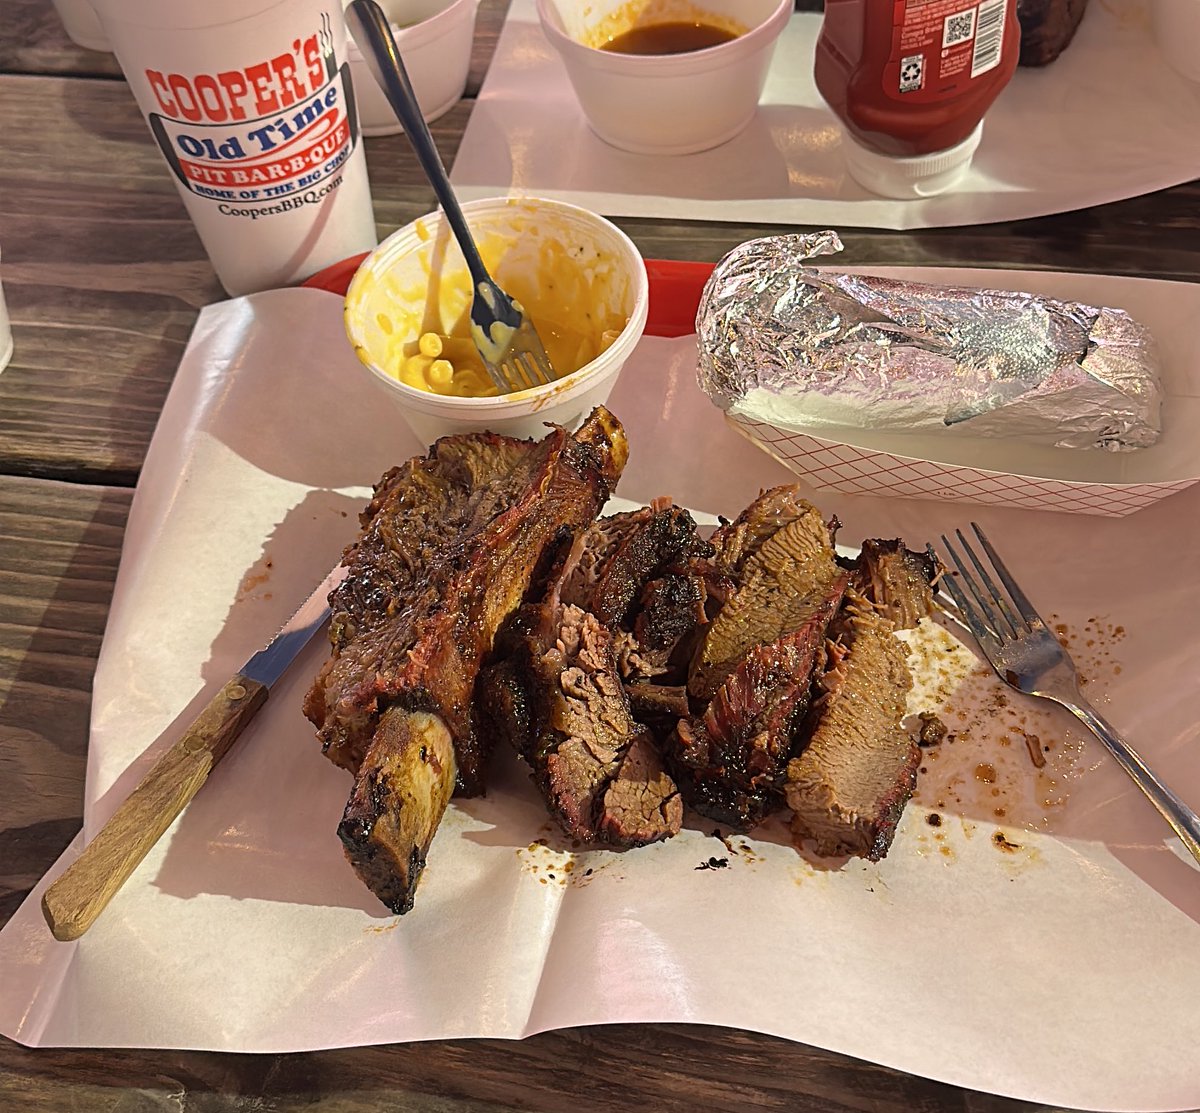 Like @CoachCarthel says, “If you can’t be a big time coach, #BeABigCoach!”
When in Austin, Tx for camp, you got to try Cooper’s Old Time Pit BBQ downtown! #FALCONSUP